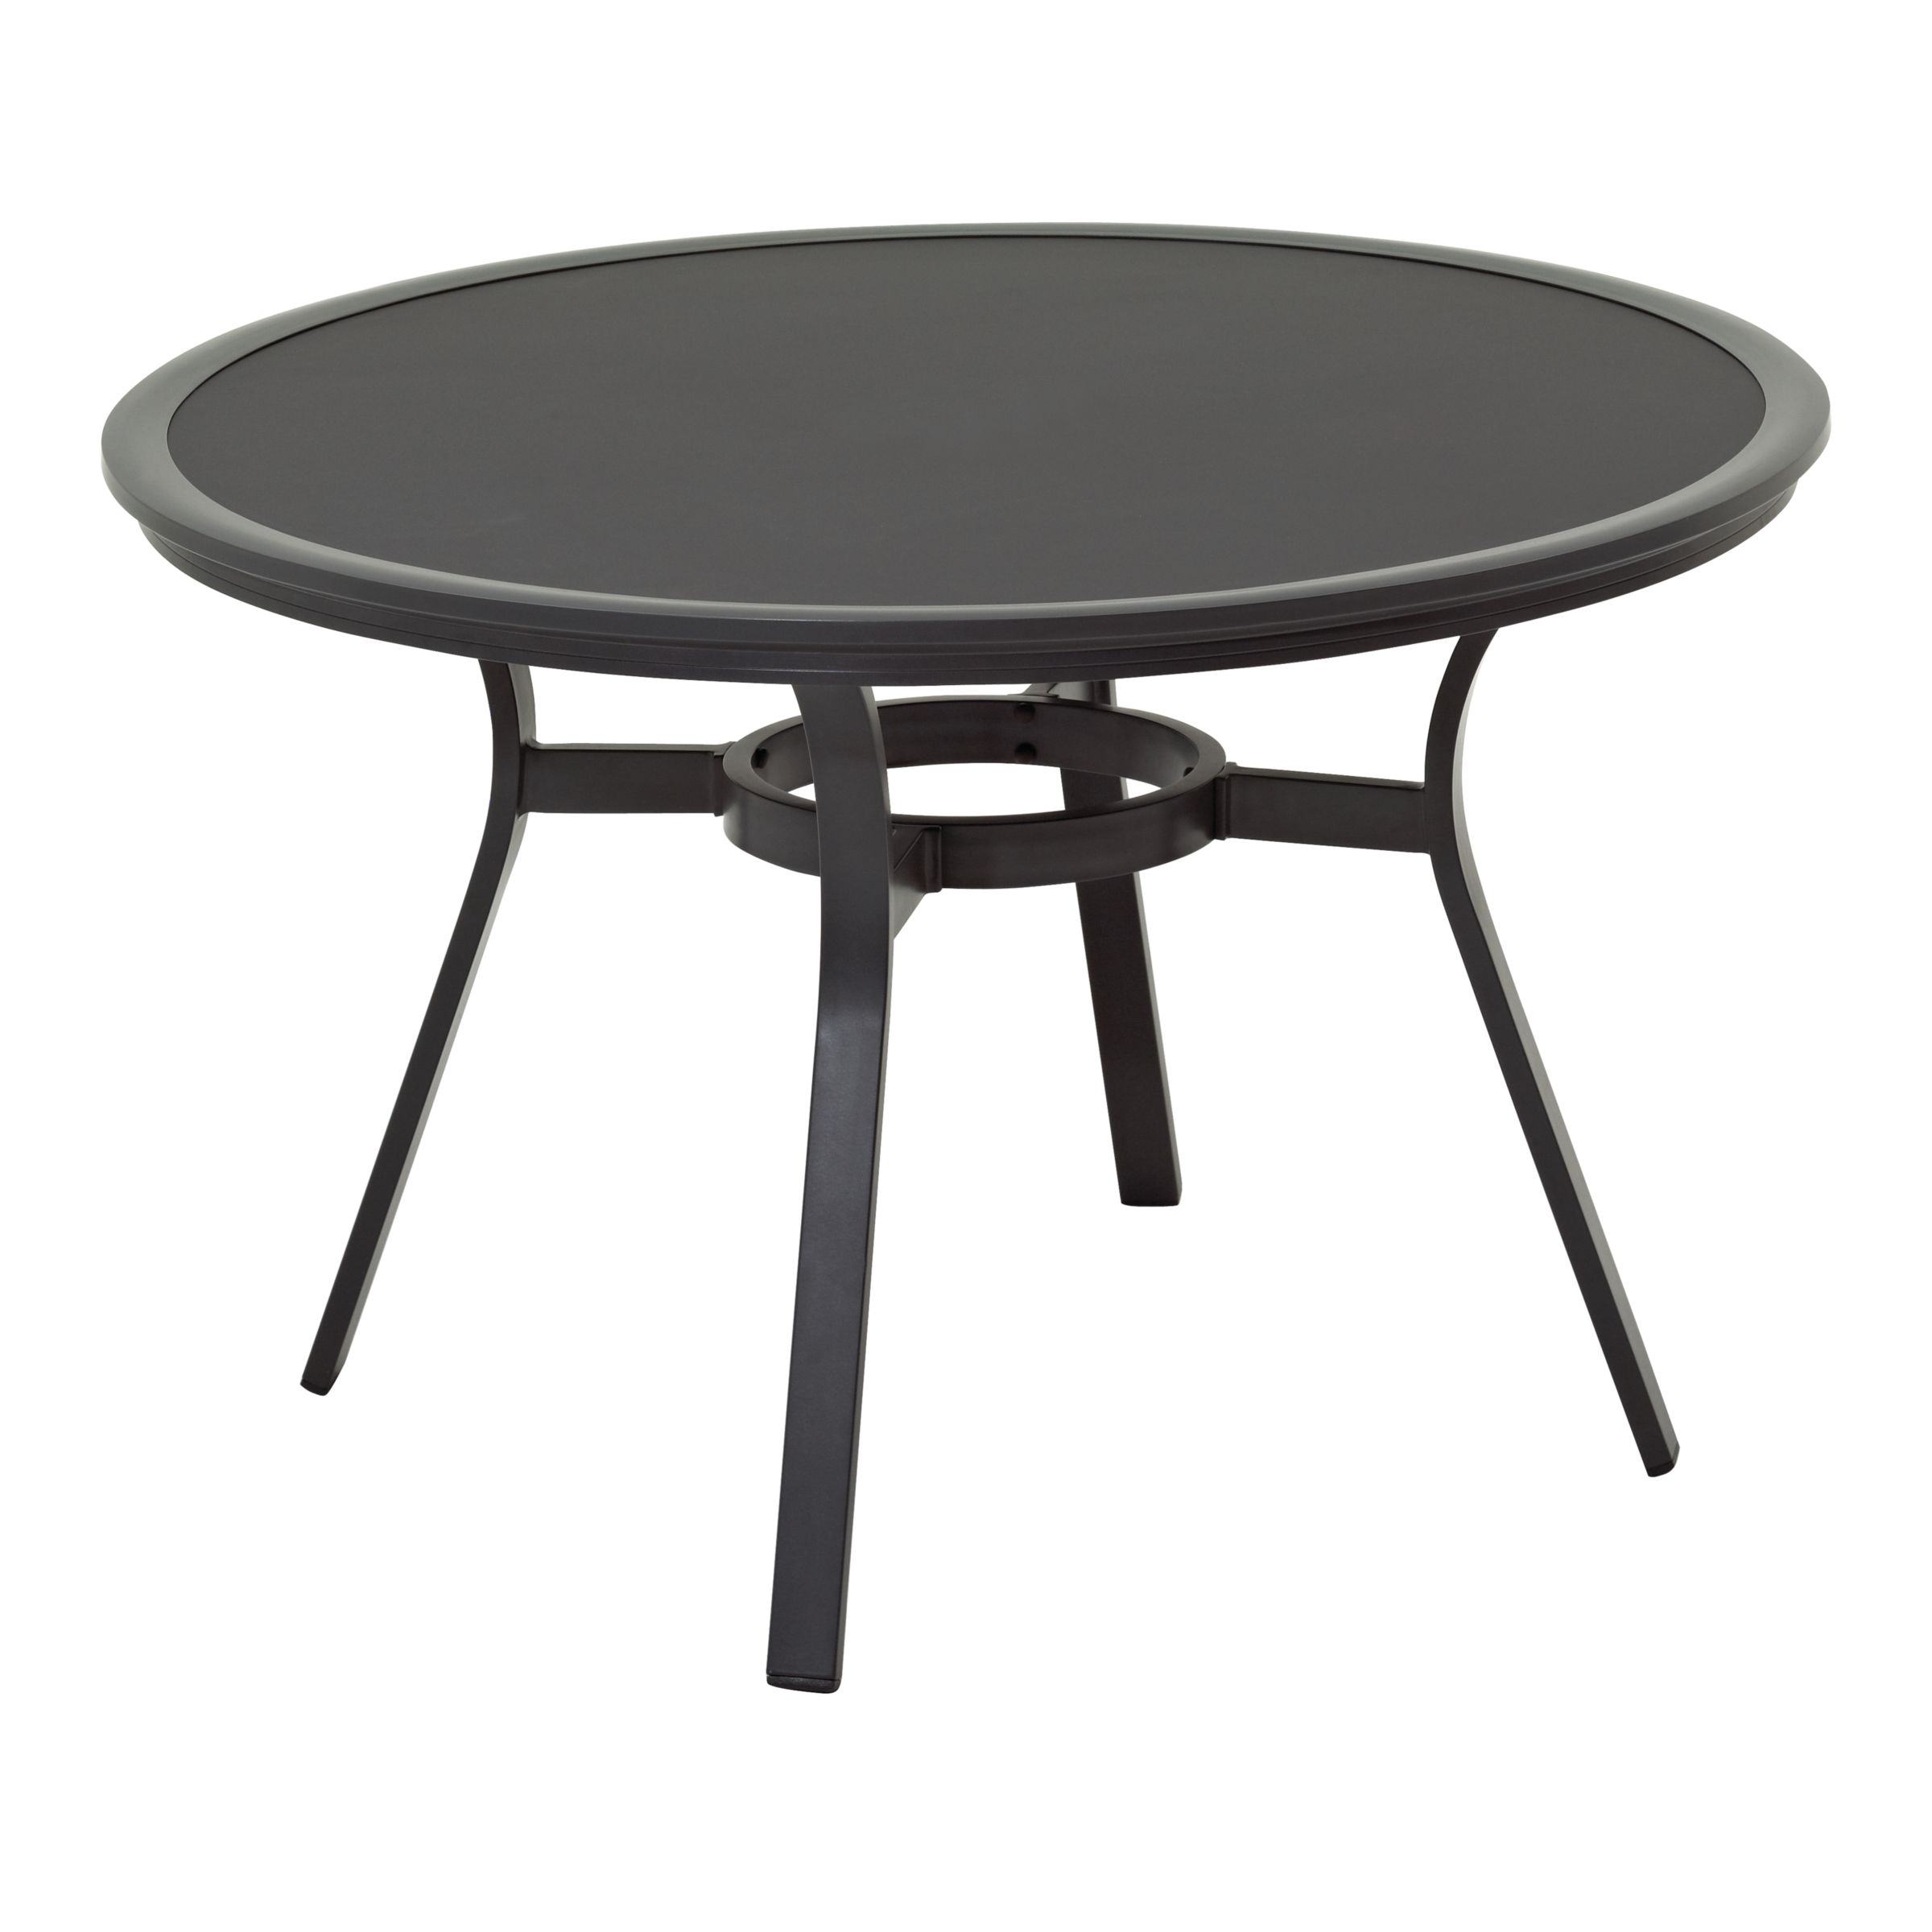 Gloster Roma Round 4 Seater Outdoor Dining Table with Glass Top, Gunmetal, width 120cm